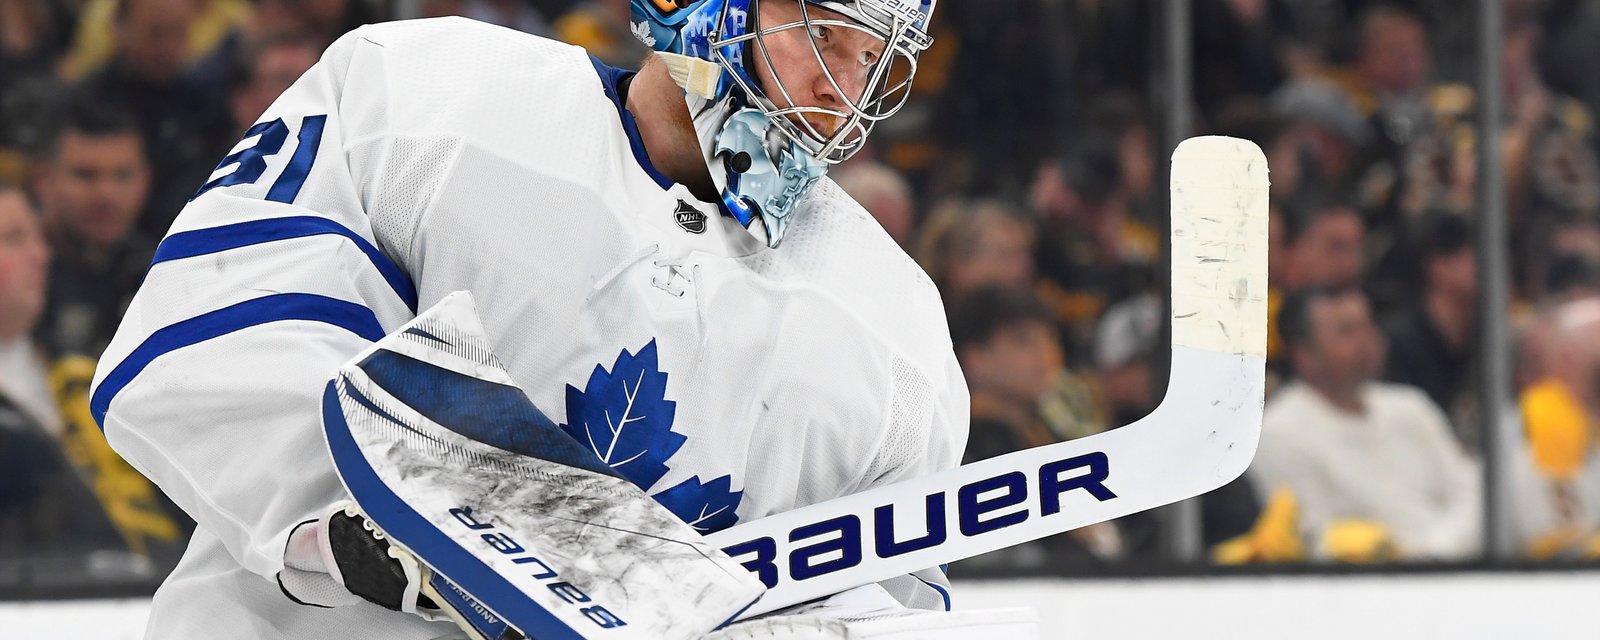 Andersen admits his mental game is off right now